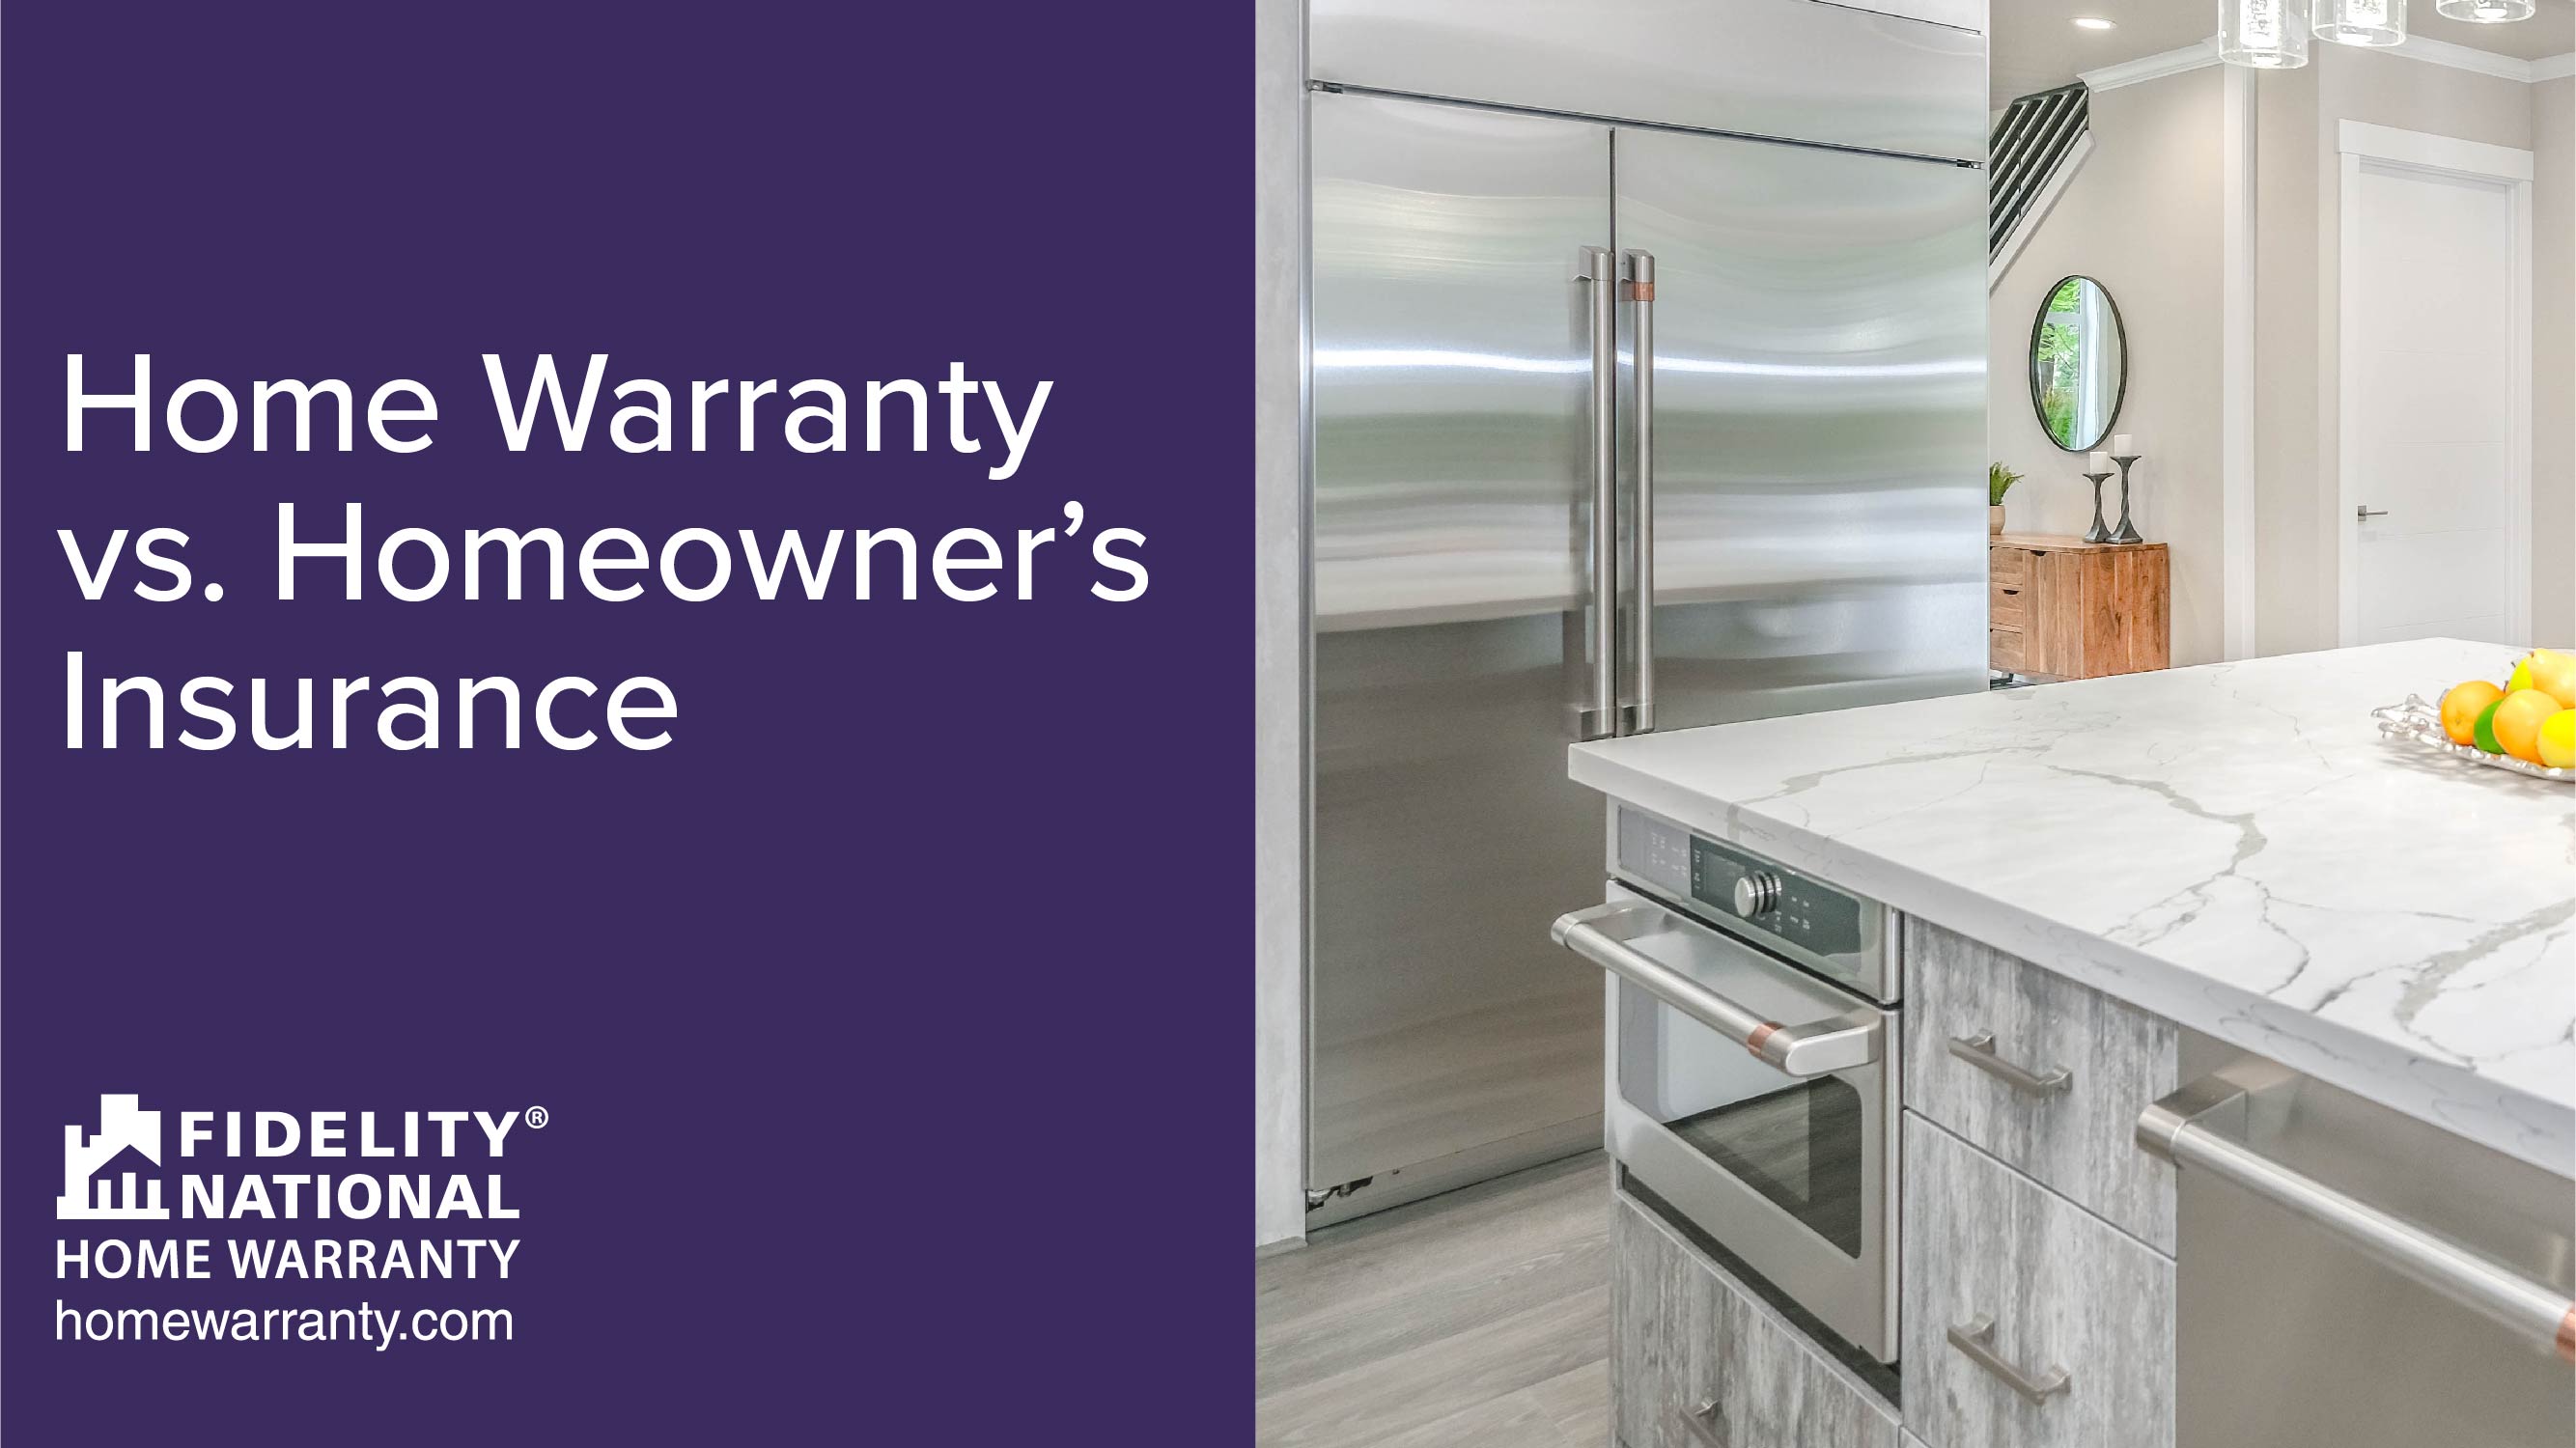 Home Warranty vs. Home Insurance. Image of a kitchen island and a metallic fridge in the background